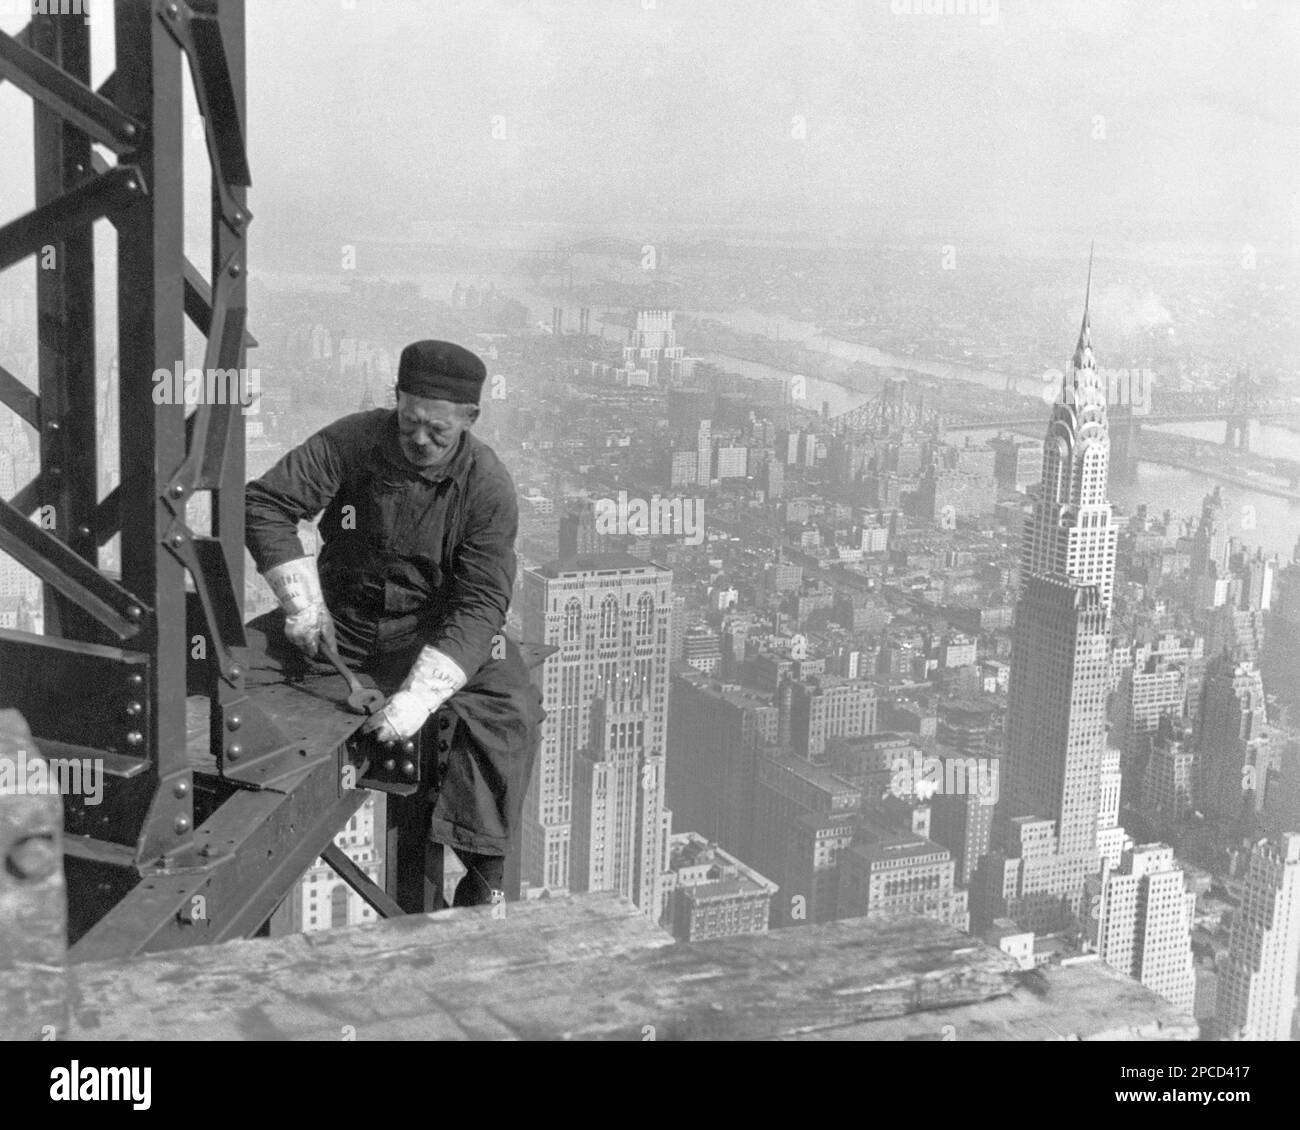 1930 , New York , NY , USA : ' Old-timer, -- keeping up with the boys . Many structural workers are above middle-age. Empire State Building ', photo taken by celebrated american photographer and sociologist LEWIS HINE ( 1874 - 1940 ) for the Work Projects Administration. of US Govern. Hine used his camera as a tool for social reform.   - ANCIENT OLD MAN - UOMO ANZIANO VECCHIO - LAVORO - WORK - LAVORATORE - WORKER - OPERAIO -  CLASSE OPERAIA LAVORATRICE - WORKING CLASS - OPERAI - LAVORATORI - LAVORO IN CANTIERE - TRAVI D' ACCIAIO - STEEL - IRON  - GRATTACIELO - PANORAMA - VERTIGO - VERTIGINE - Stock Photo